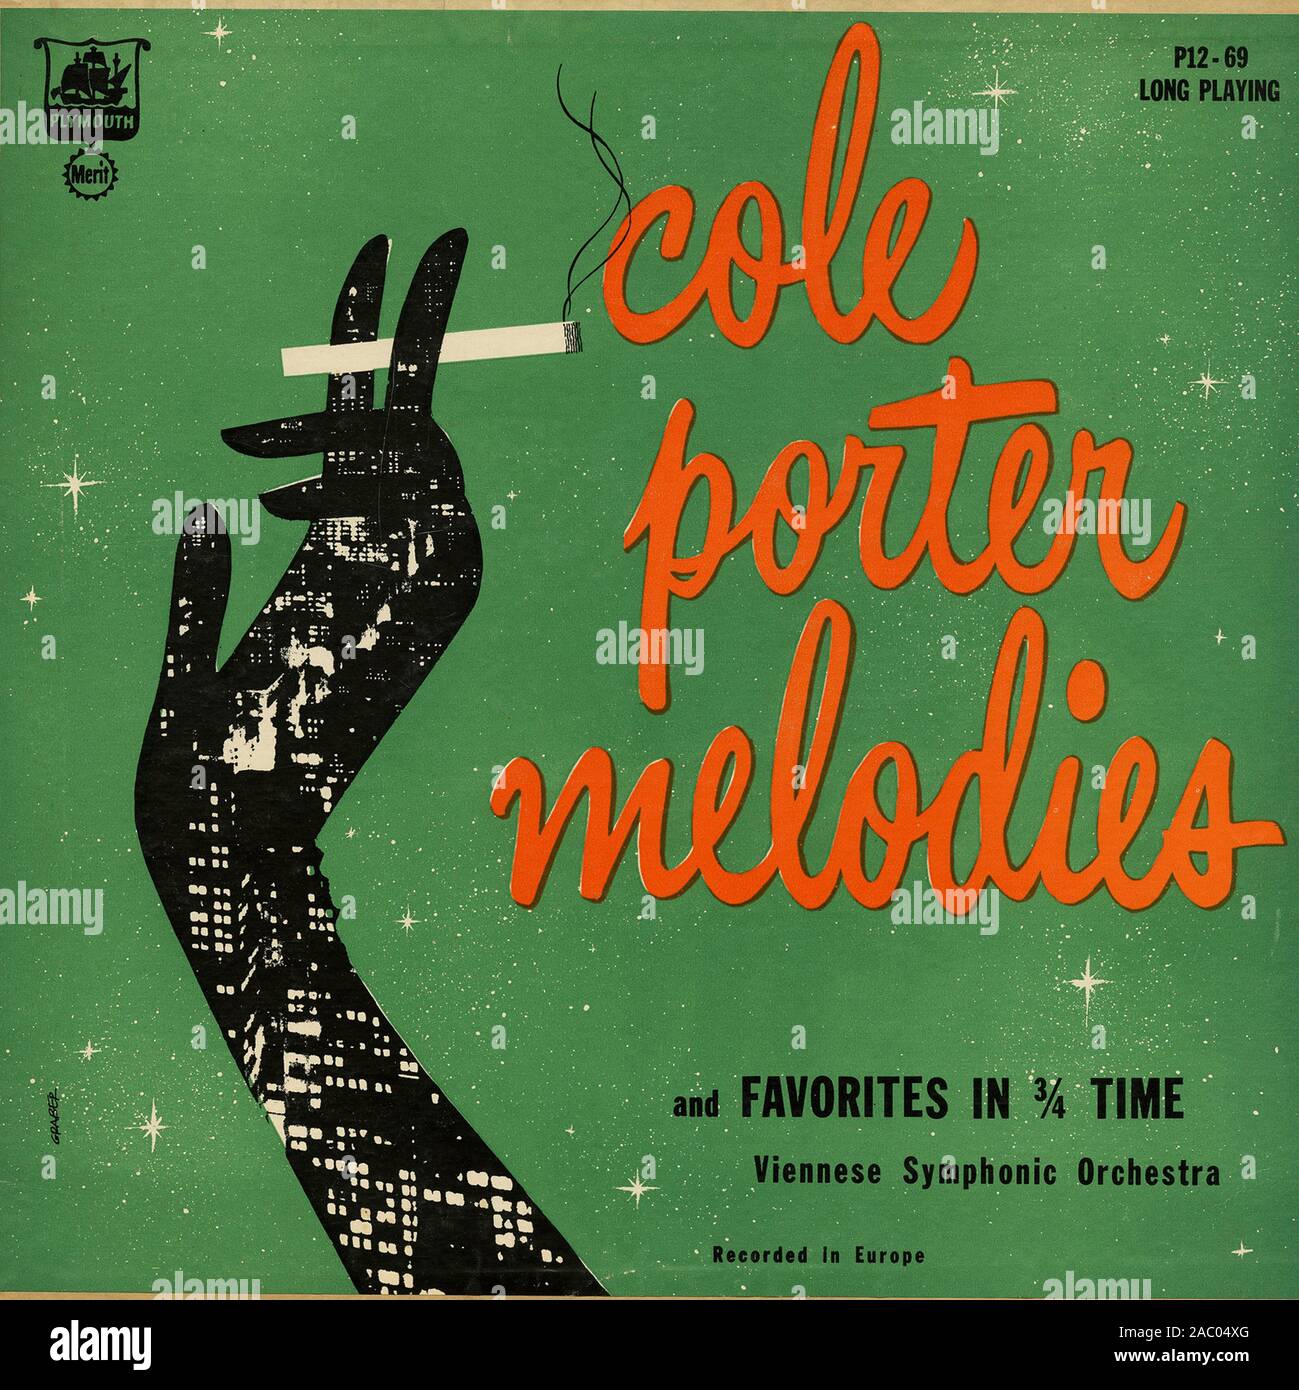 Cole Porter Melodies and Favorites in 3 4 Time   - Vintage vinyl album cover Stock Photo